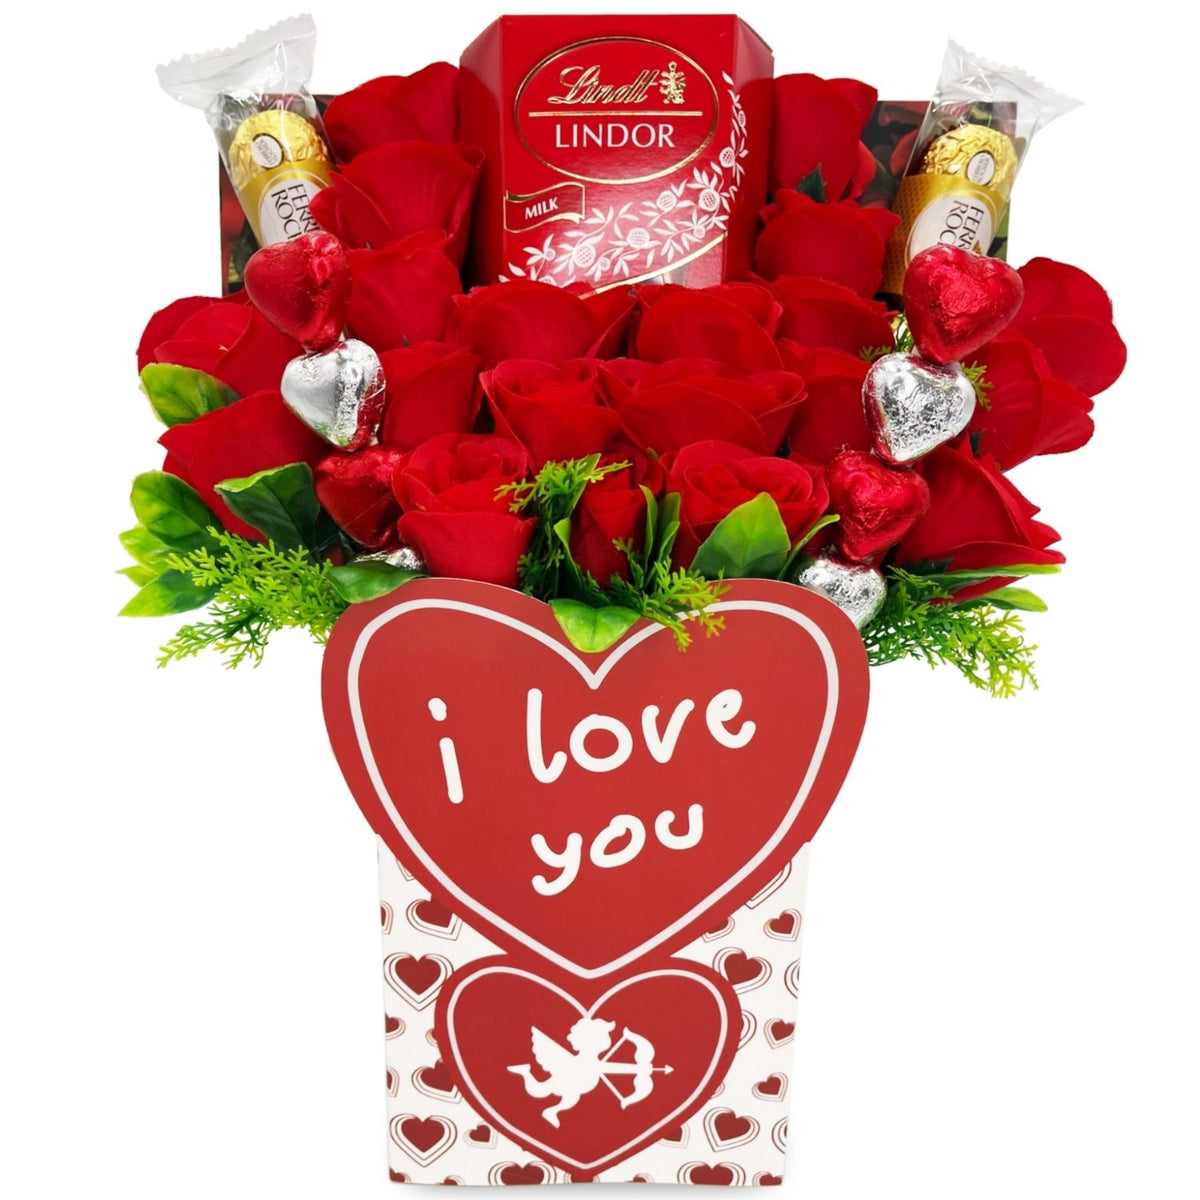 Personalised Lindt Chocolate Gift Box | YourSurprise